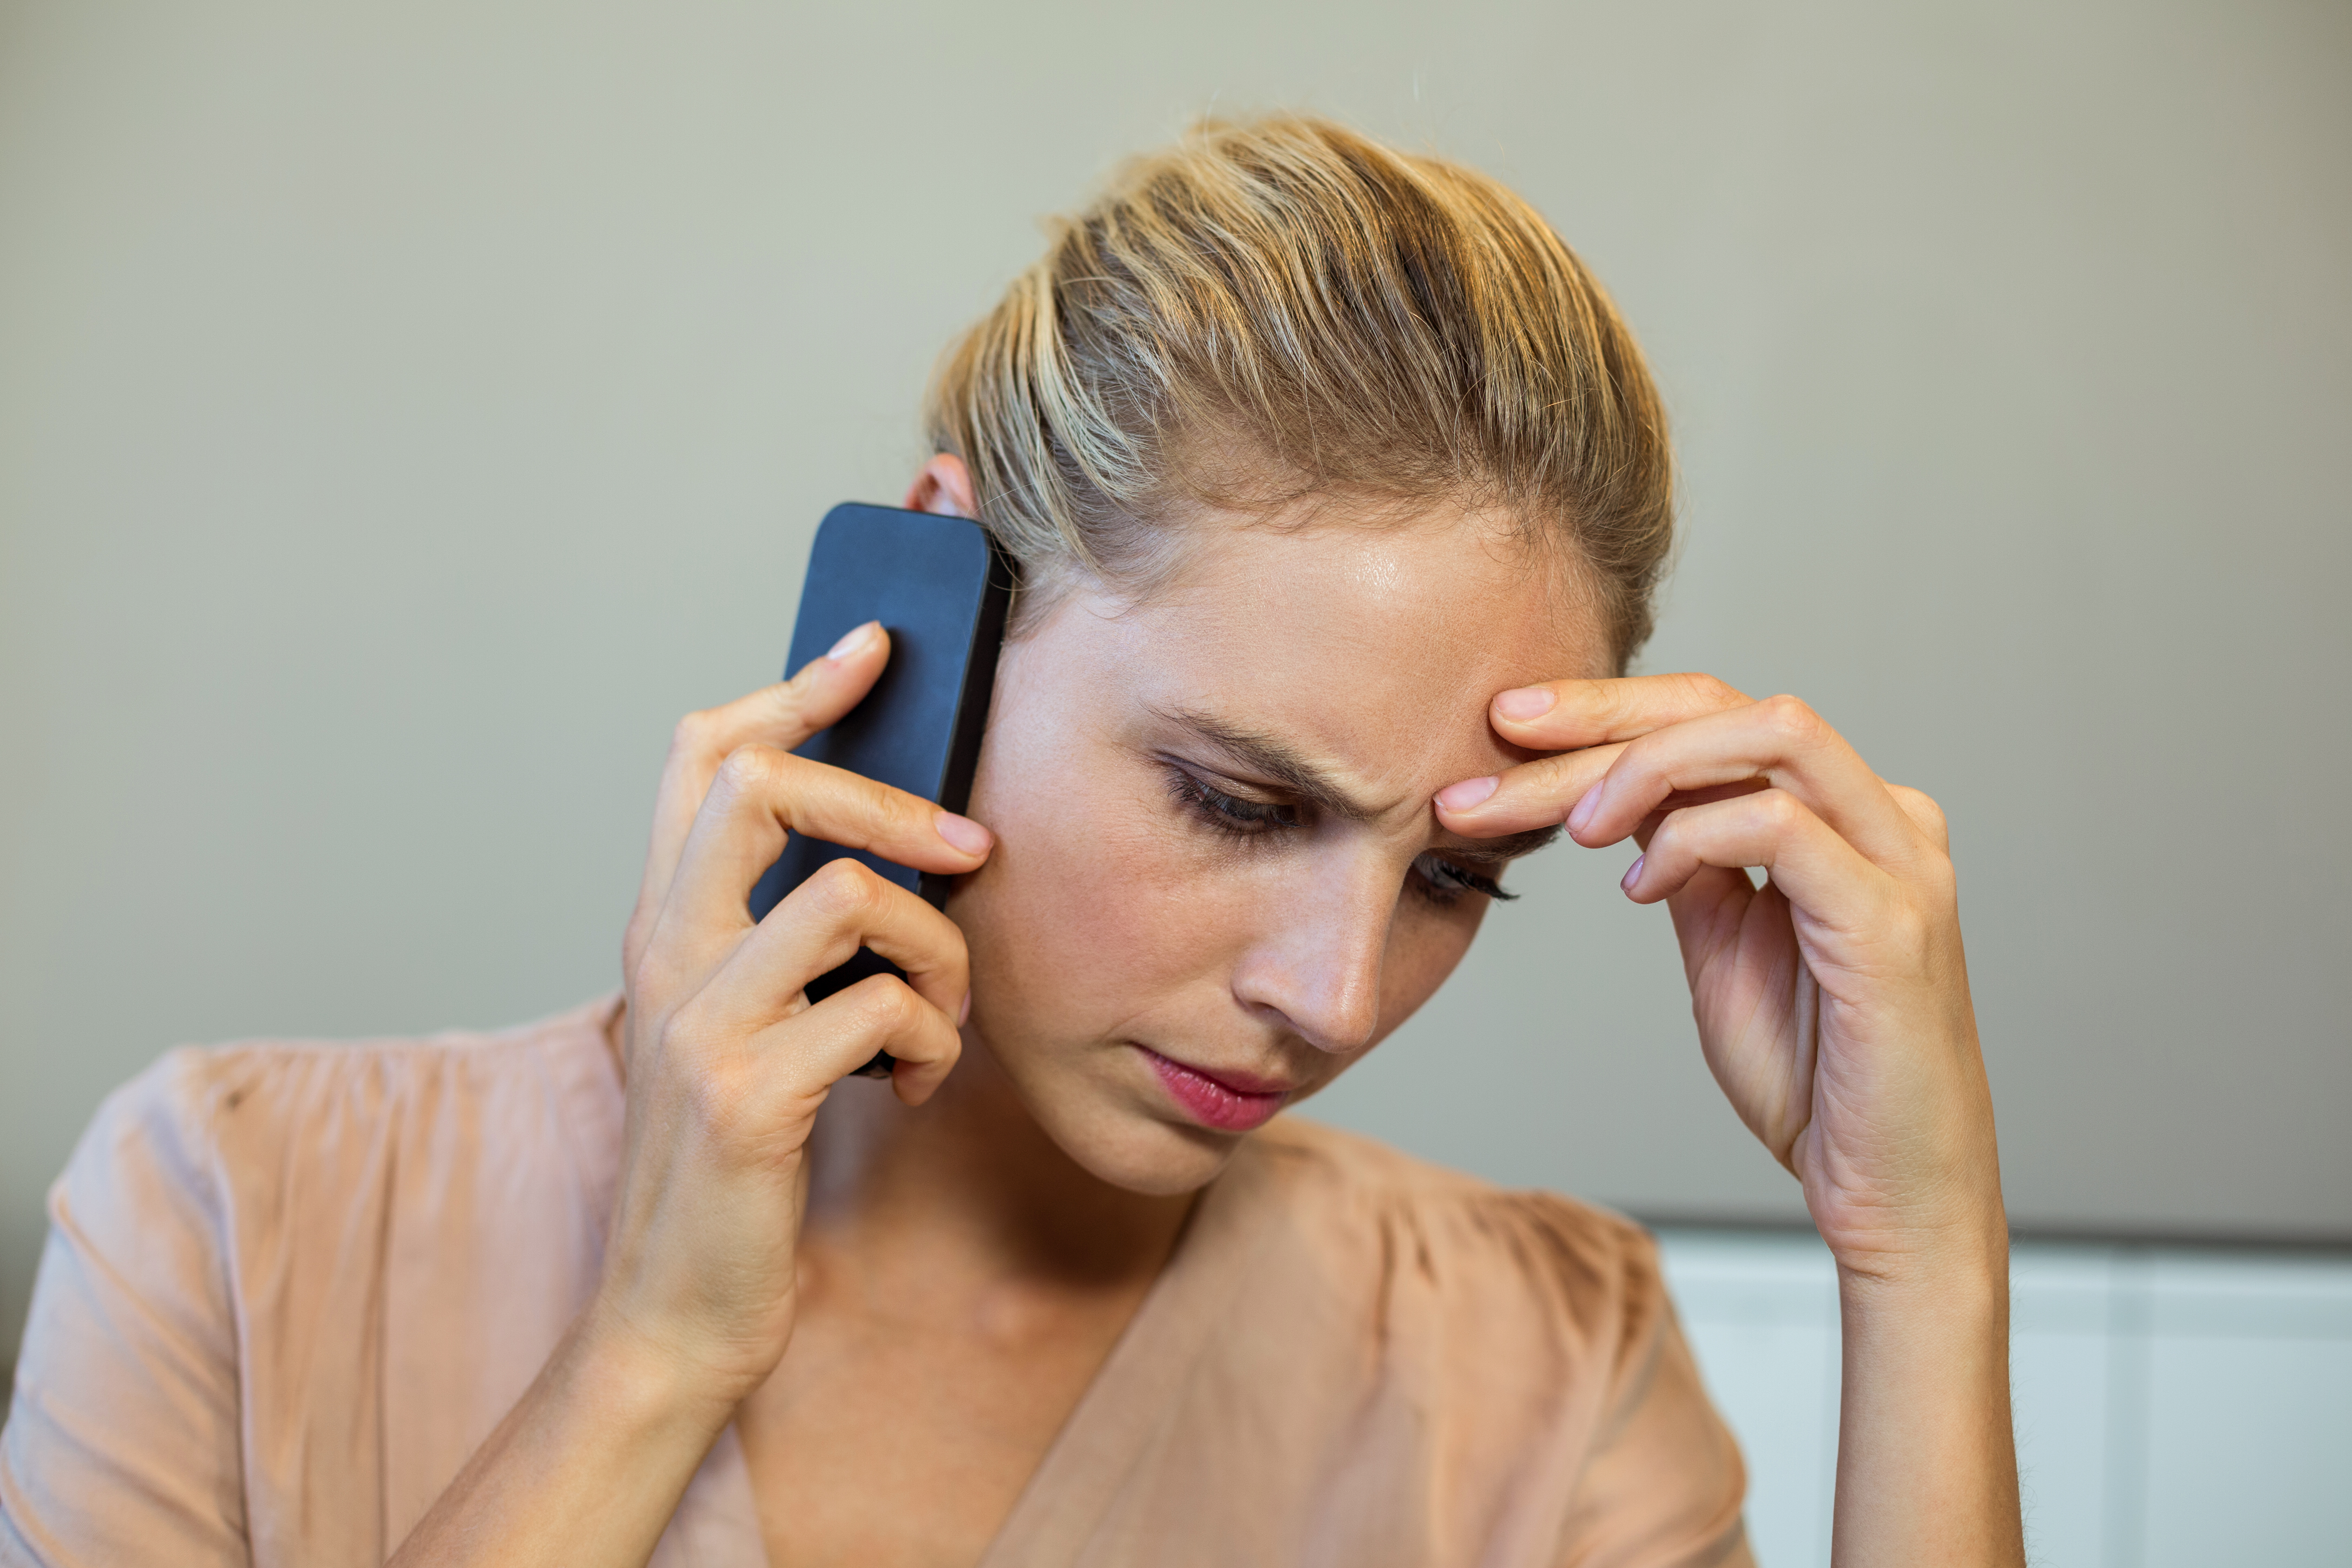 Young woman talking on the phone looking upset | Source: Shutterstock